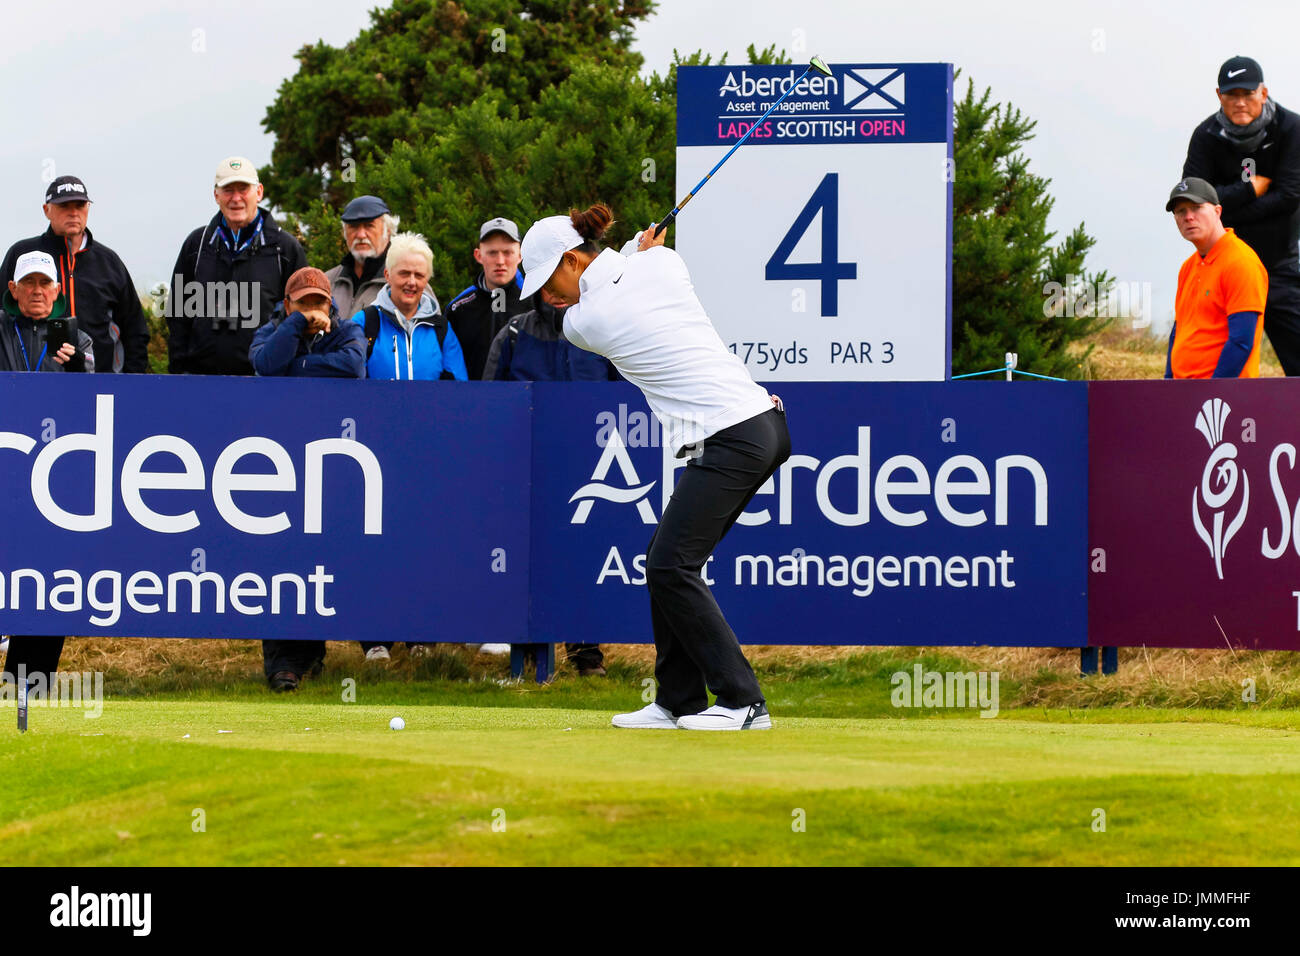 Irvine, Scotland, UK. 28th July, 2017. On the second day of the Ladies Scottish Open Championship at Dundonald Links, Irvine, Ayrshire, Scotland the weather remained testing with strong winds gusting upto 25 mph. As the players battled to keep control on their golf ball some good scores were posted and leaders starting to emerge with totals of 4, 5 and 6 under for the first two rounds. Credit: Findlay/Alamy Live News Stock Photo